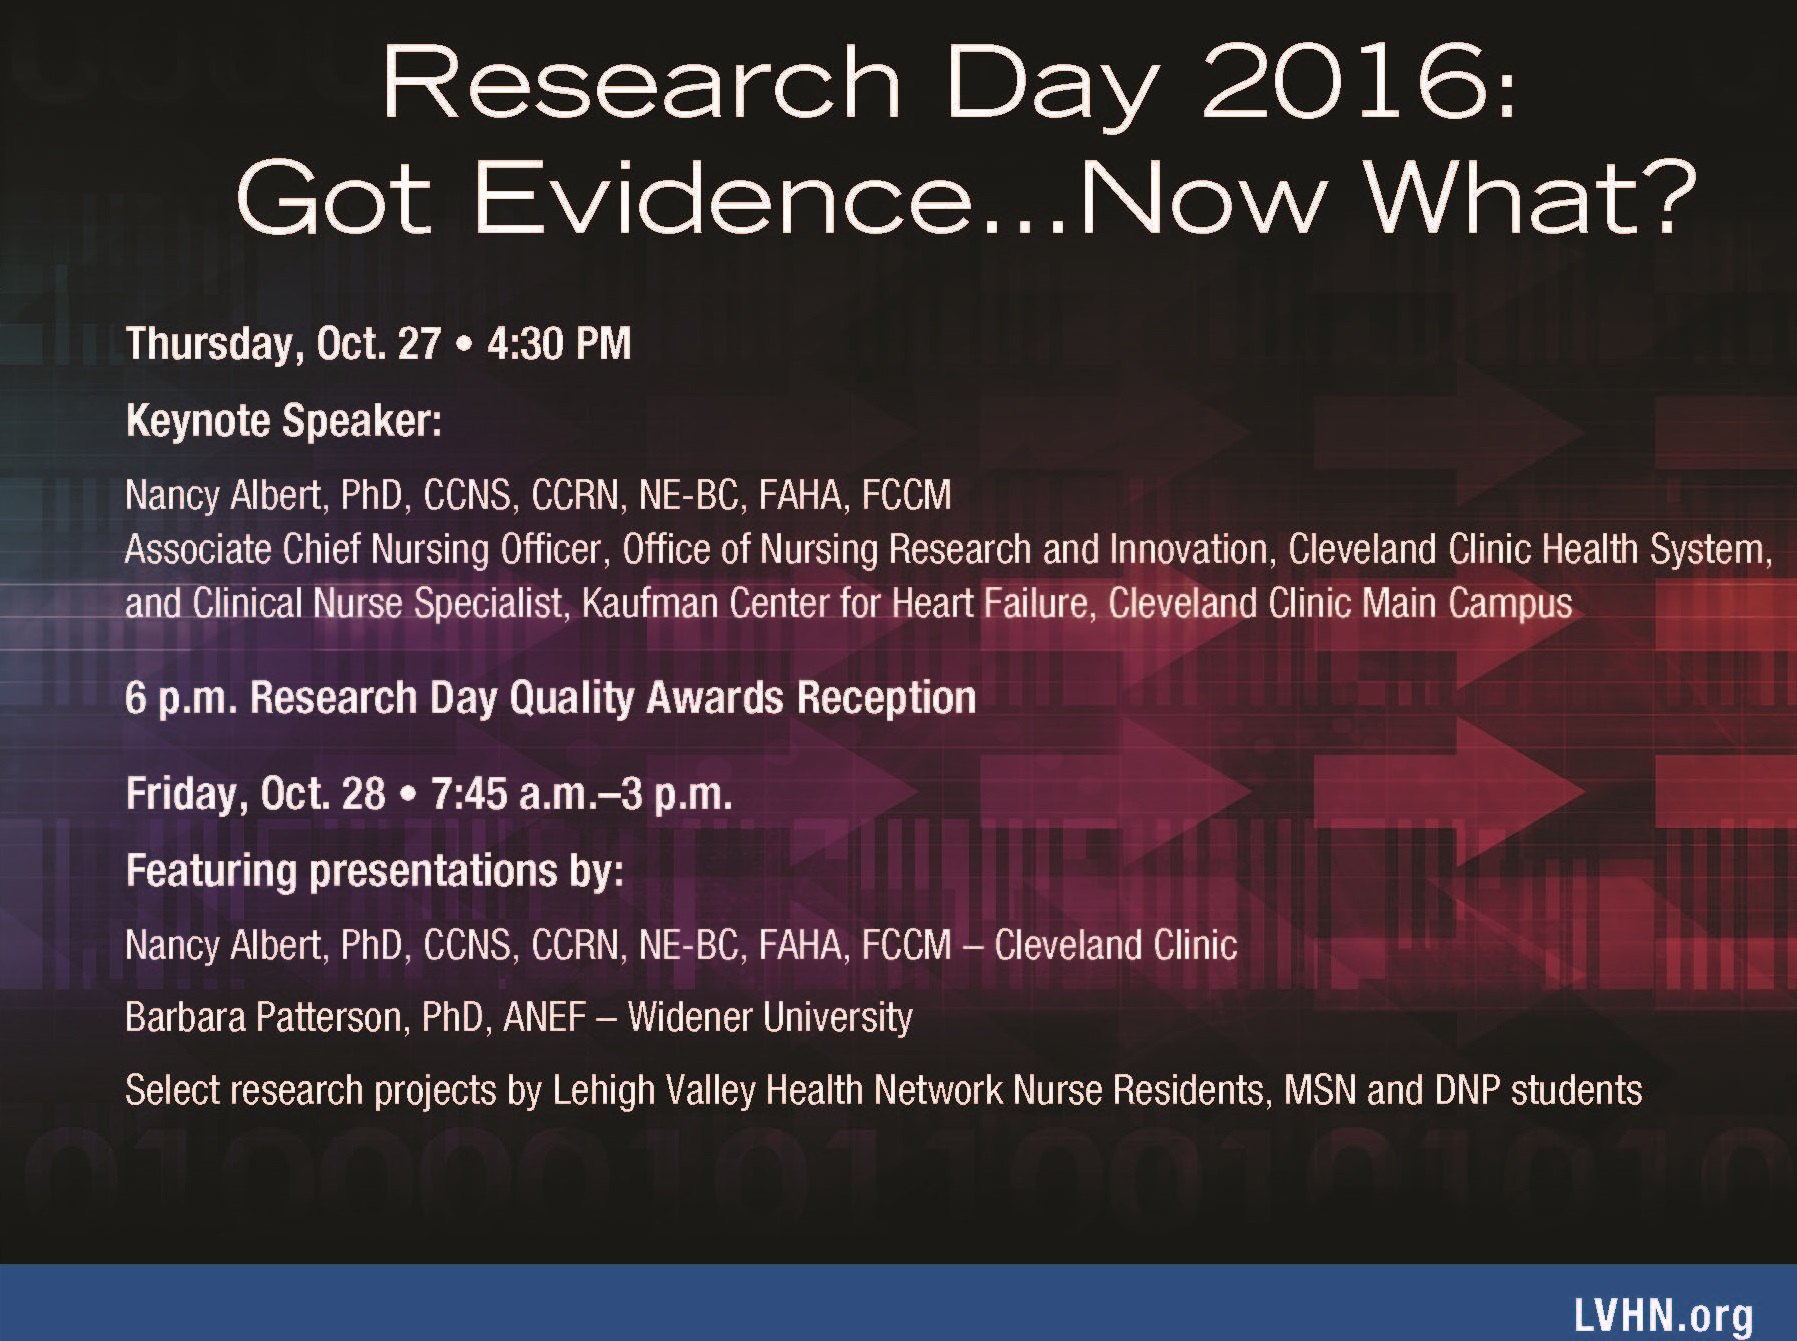 Research Day 2016: Got Evidence.... Now What?